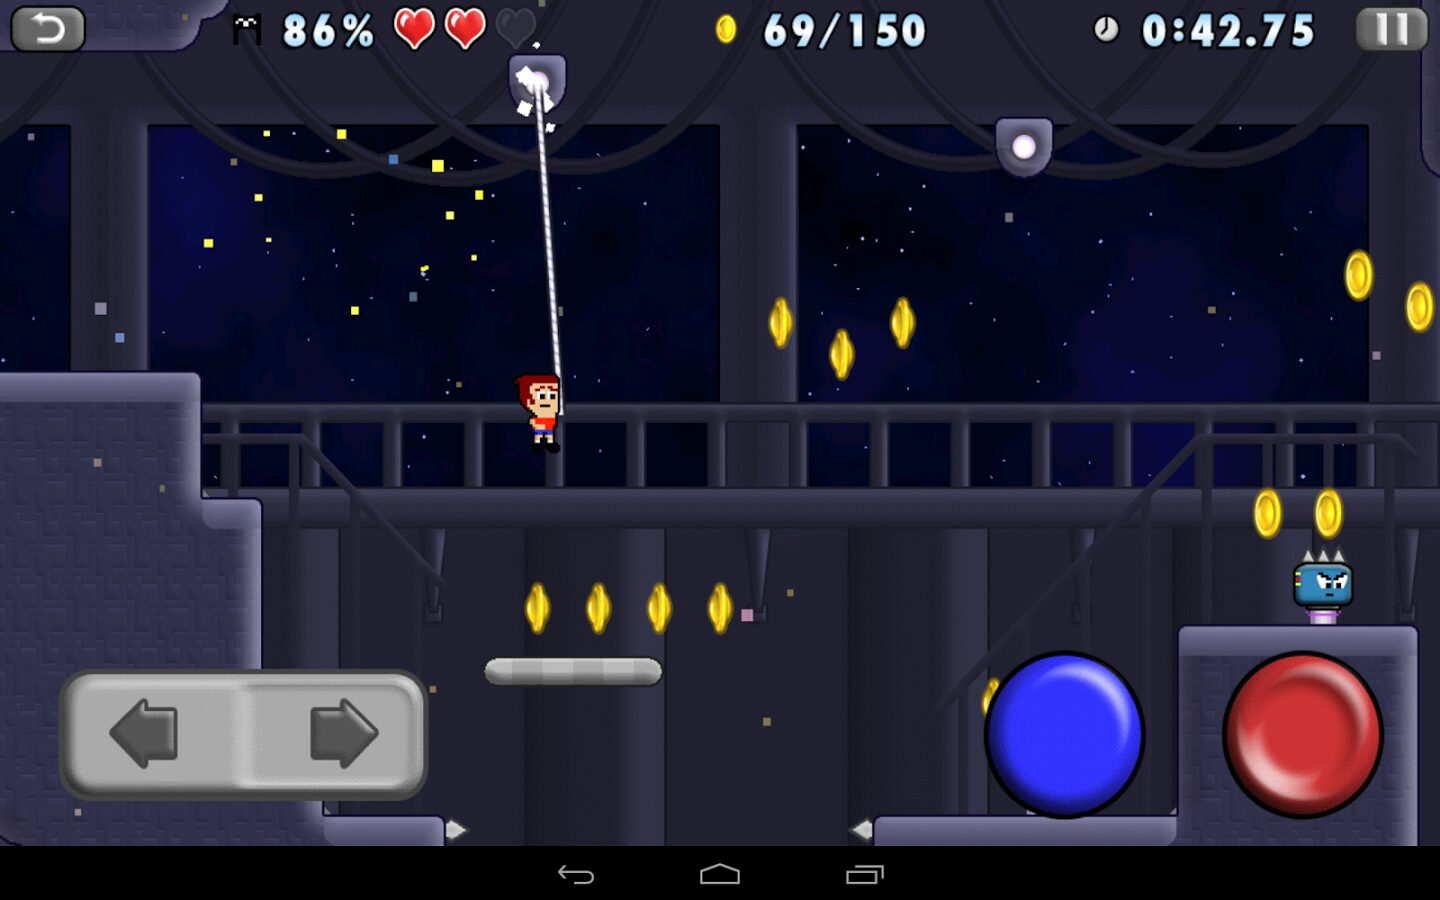 Derniers Jeux Android, Derniers Jeux Android : Mikey Hooks, Family Guy, Cards and Castles, &#8230;